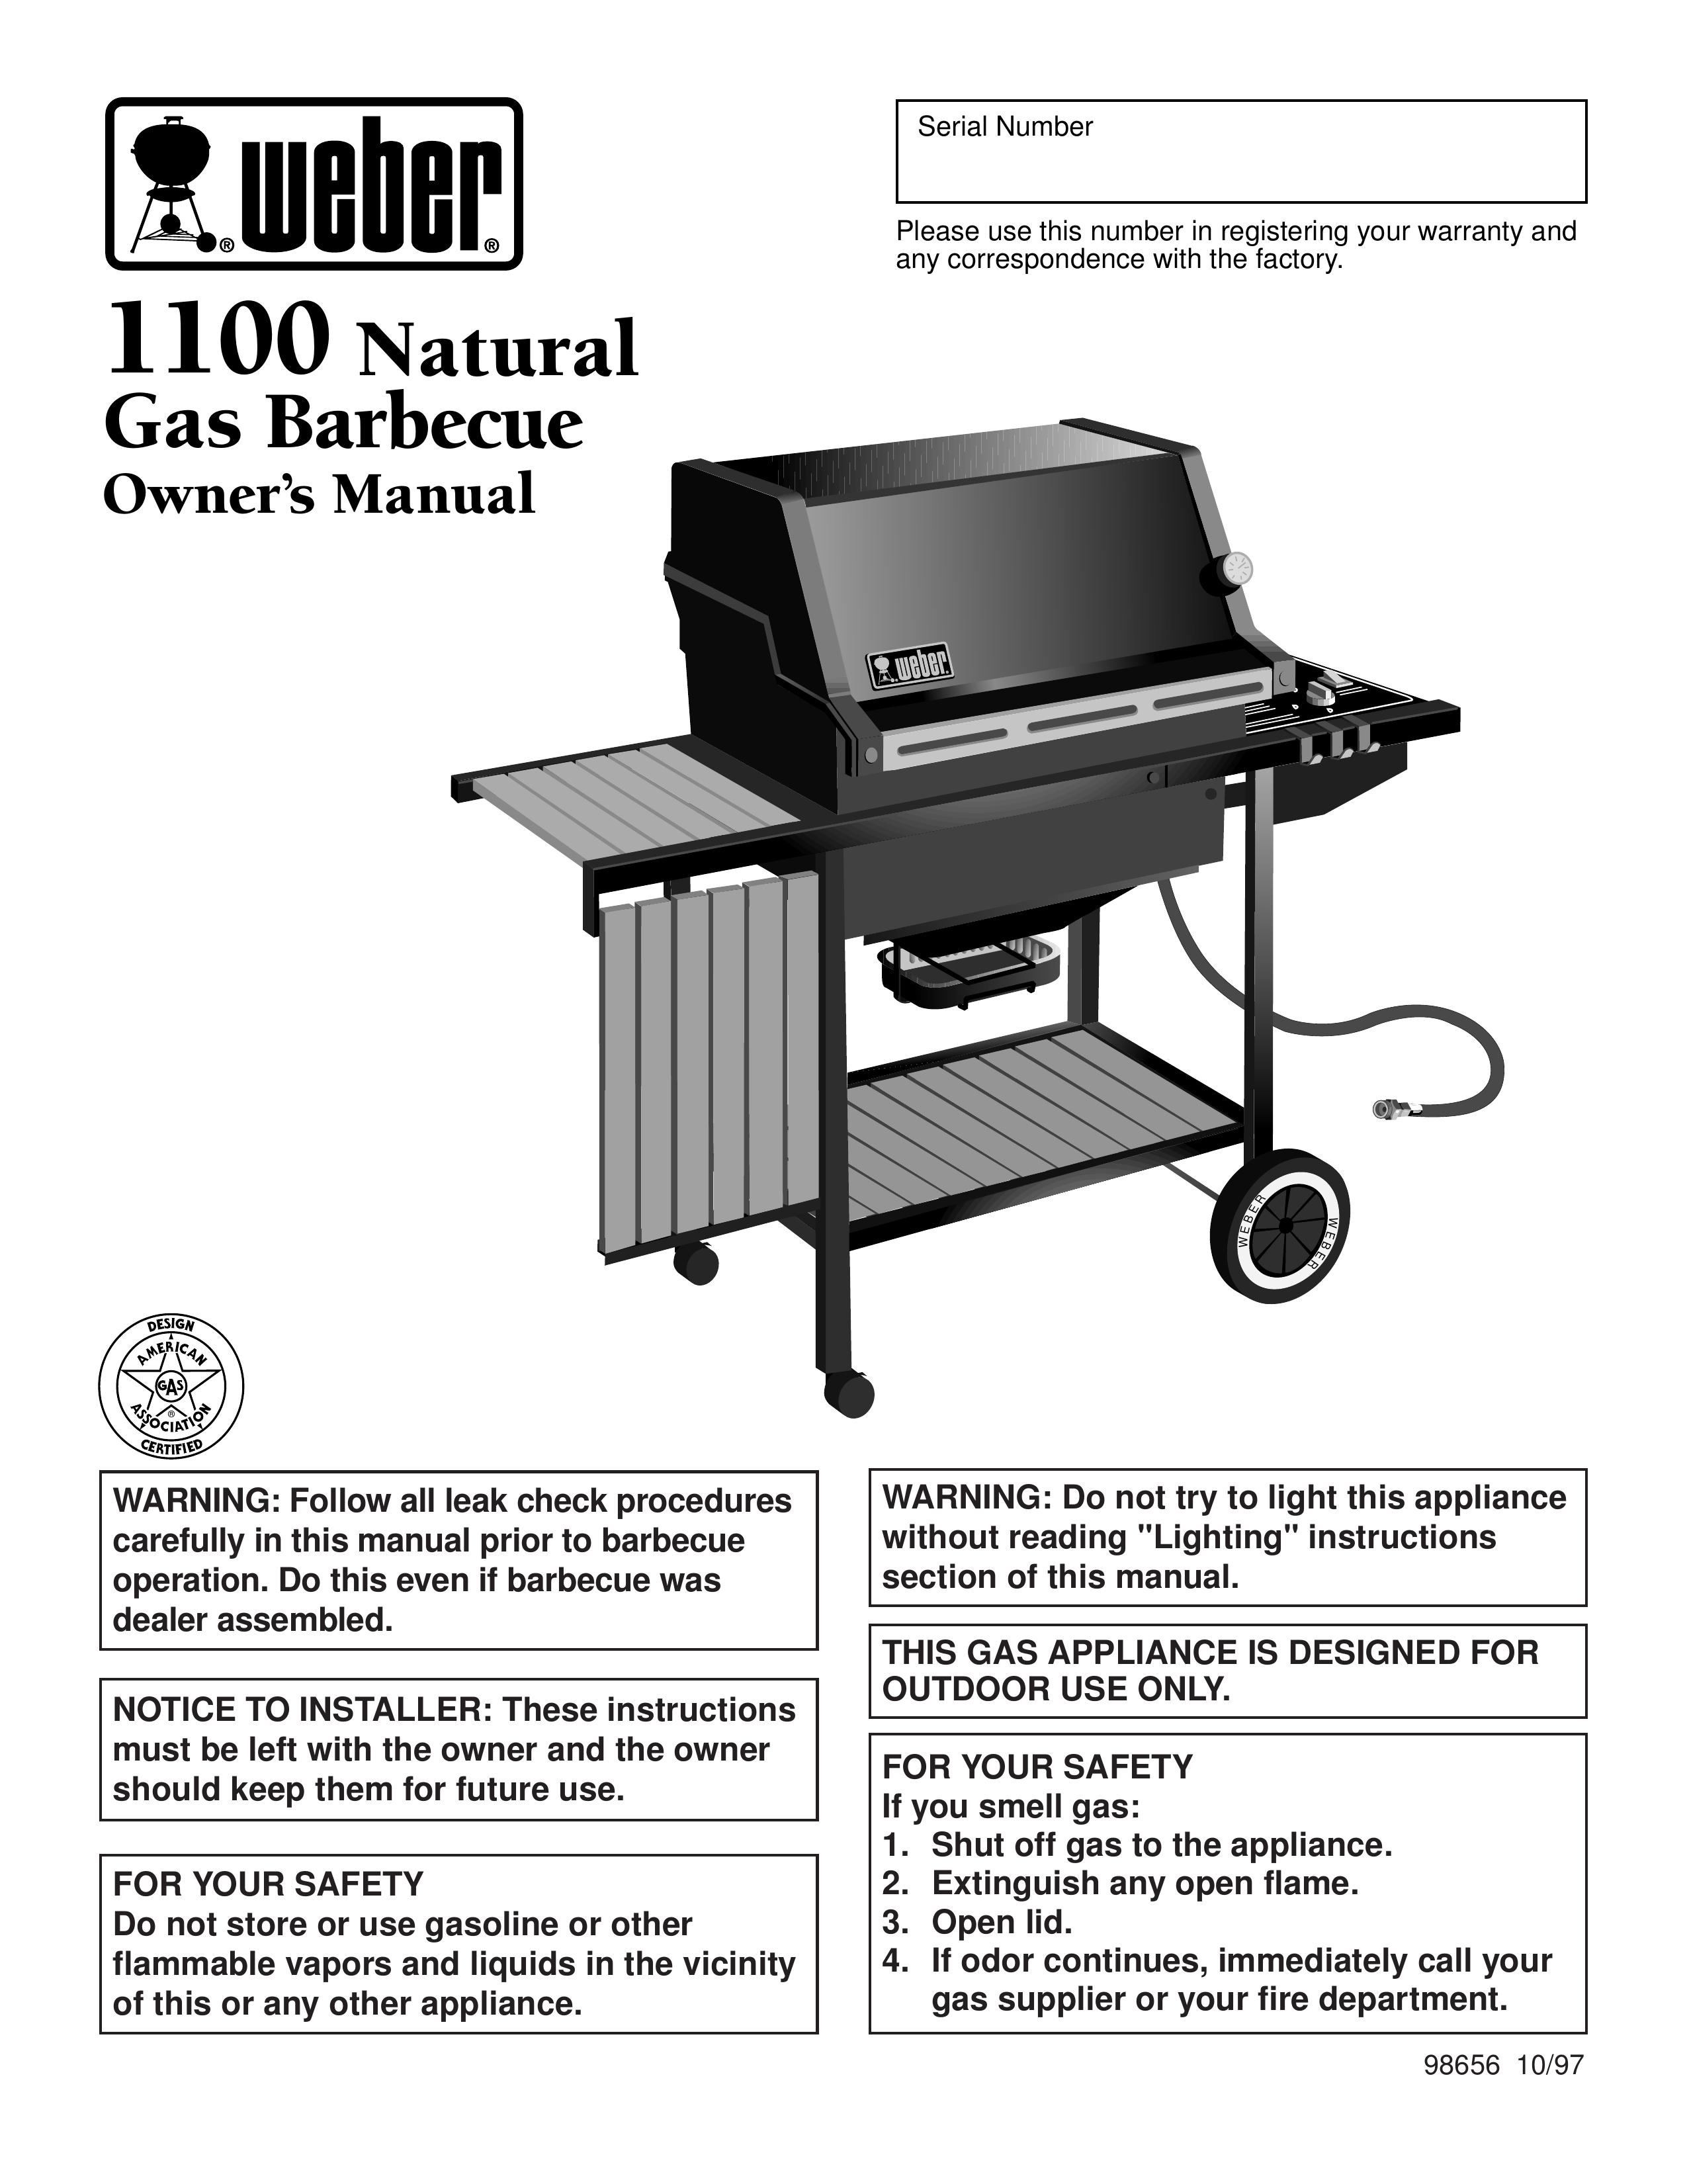 Weber 1100 Gas Grill User Manual